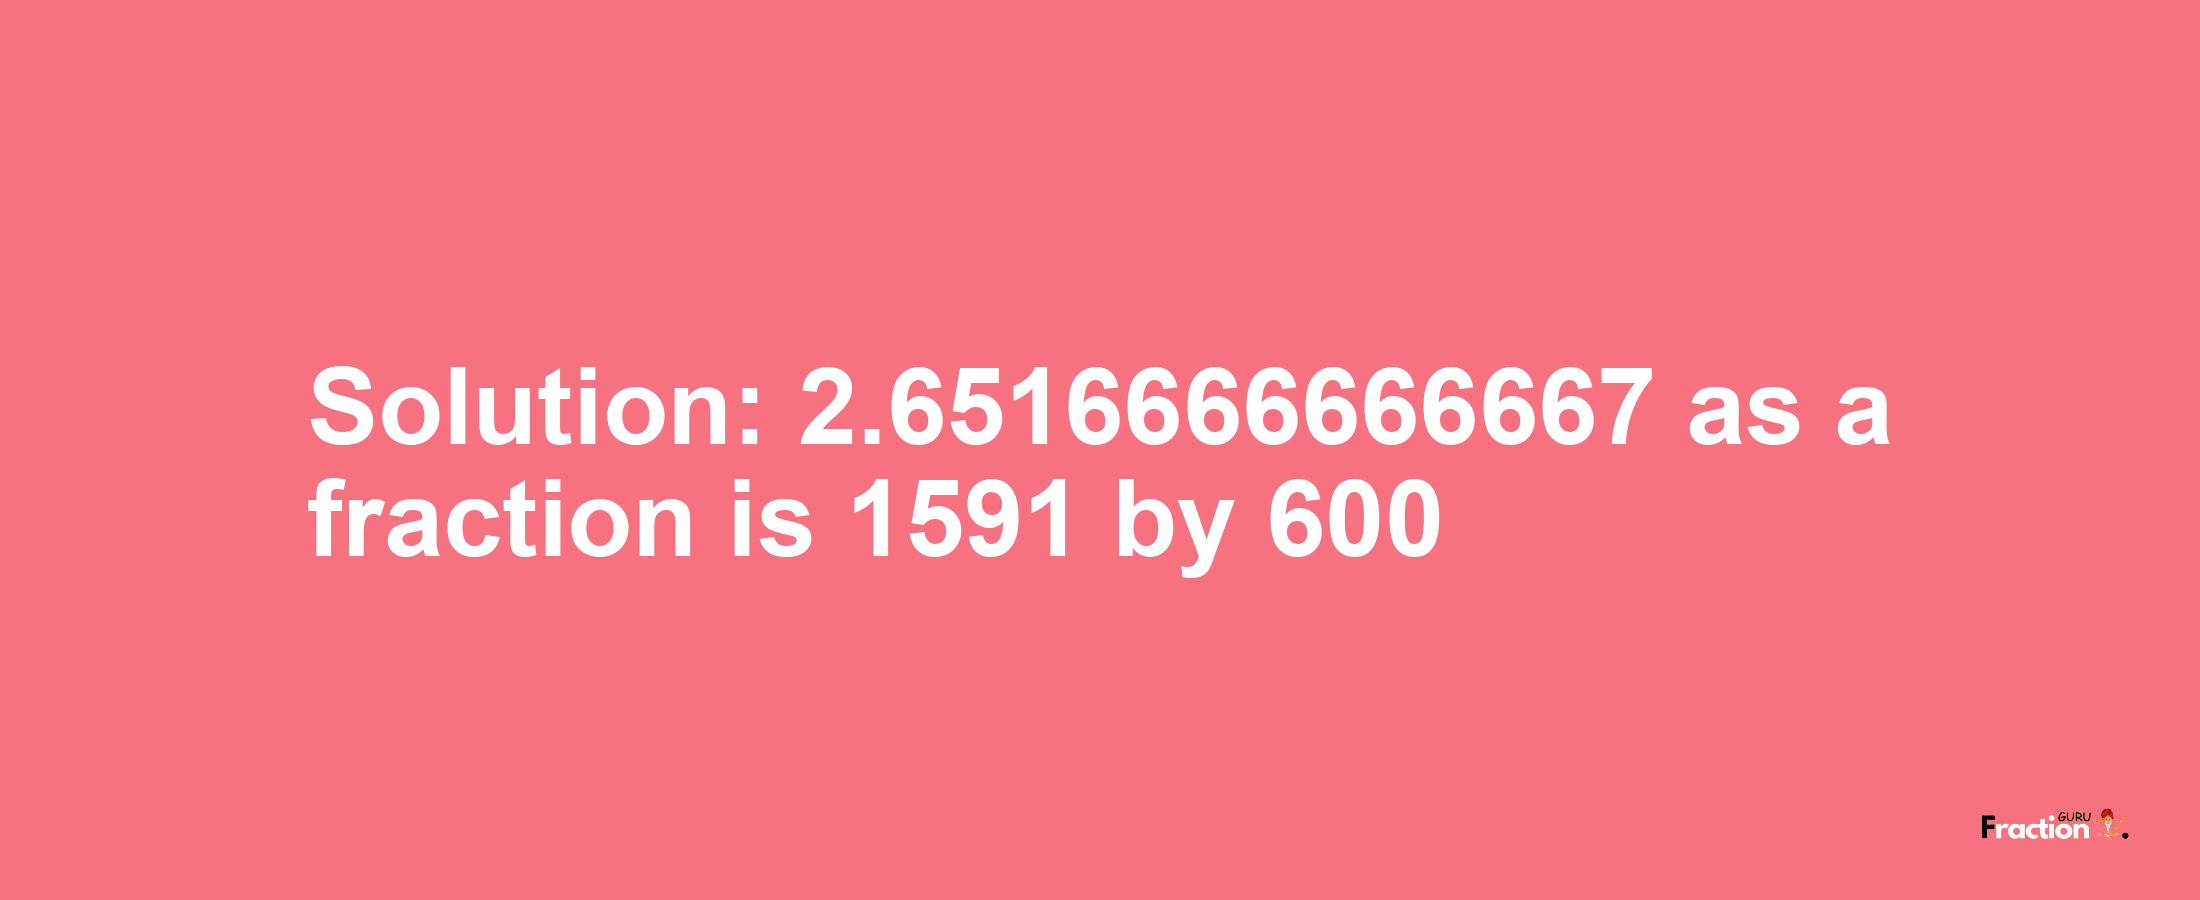 Solution:2.6516666666667 as a fraction is 1591/600